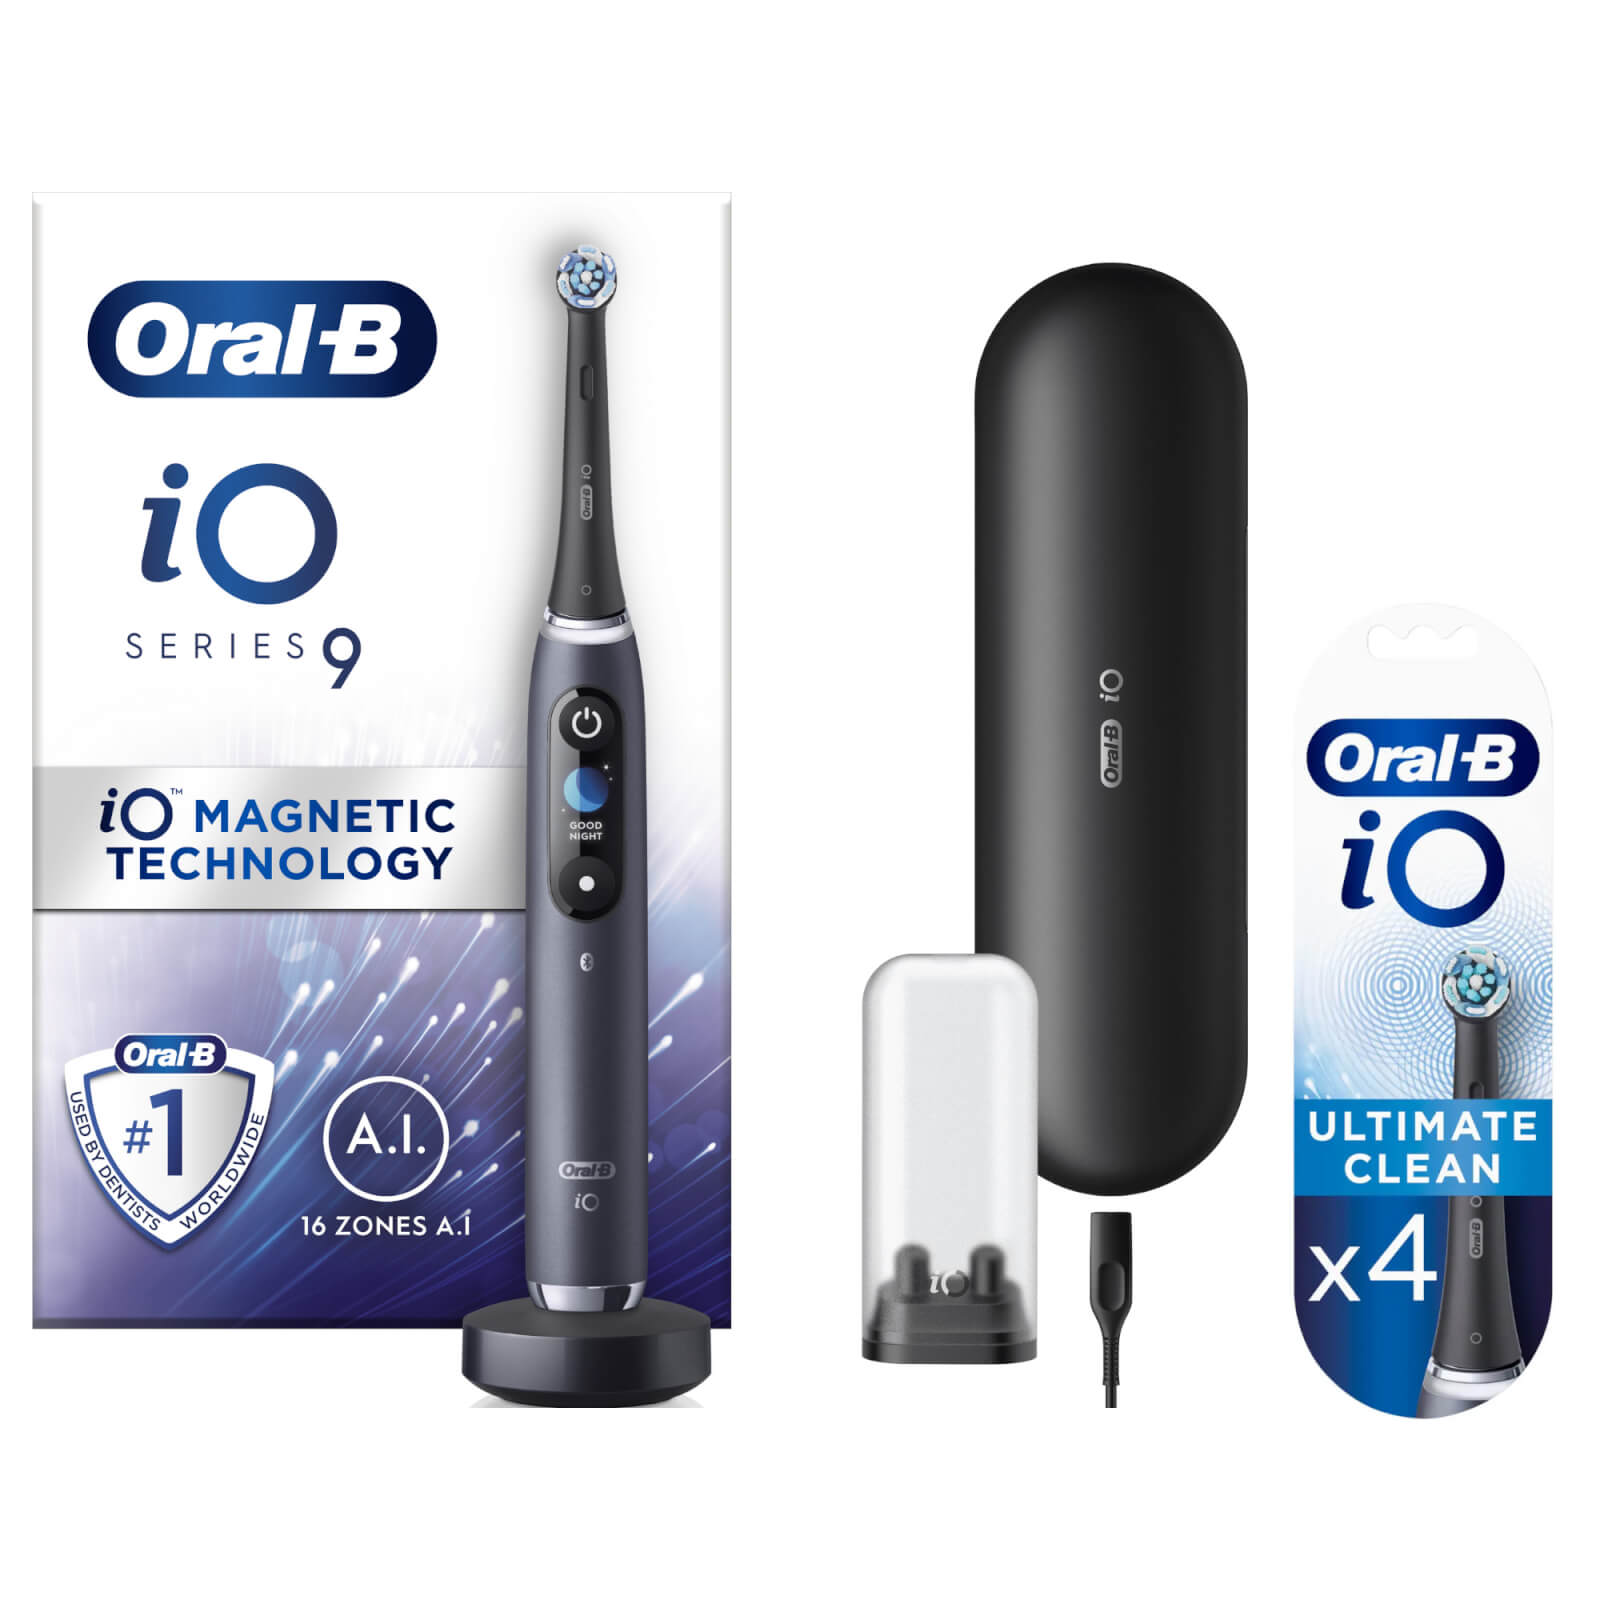 Oral B iO9 Black Onyx Electric Toothbrush with Charging Travel Case - Toothbrush + 4 Refills